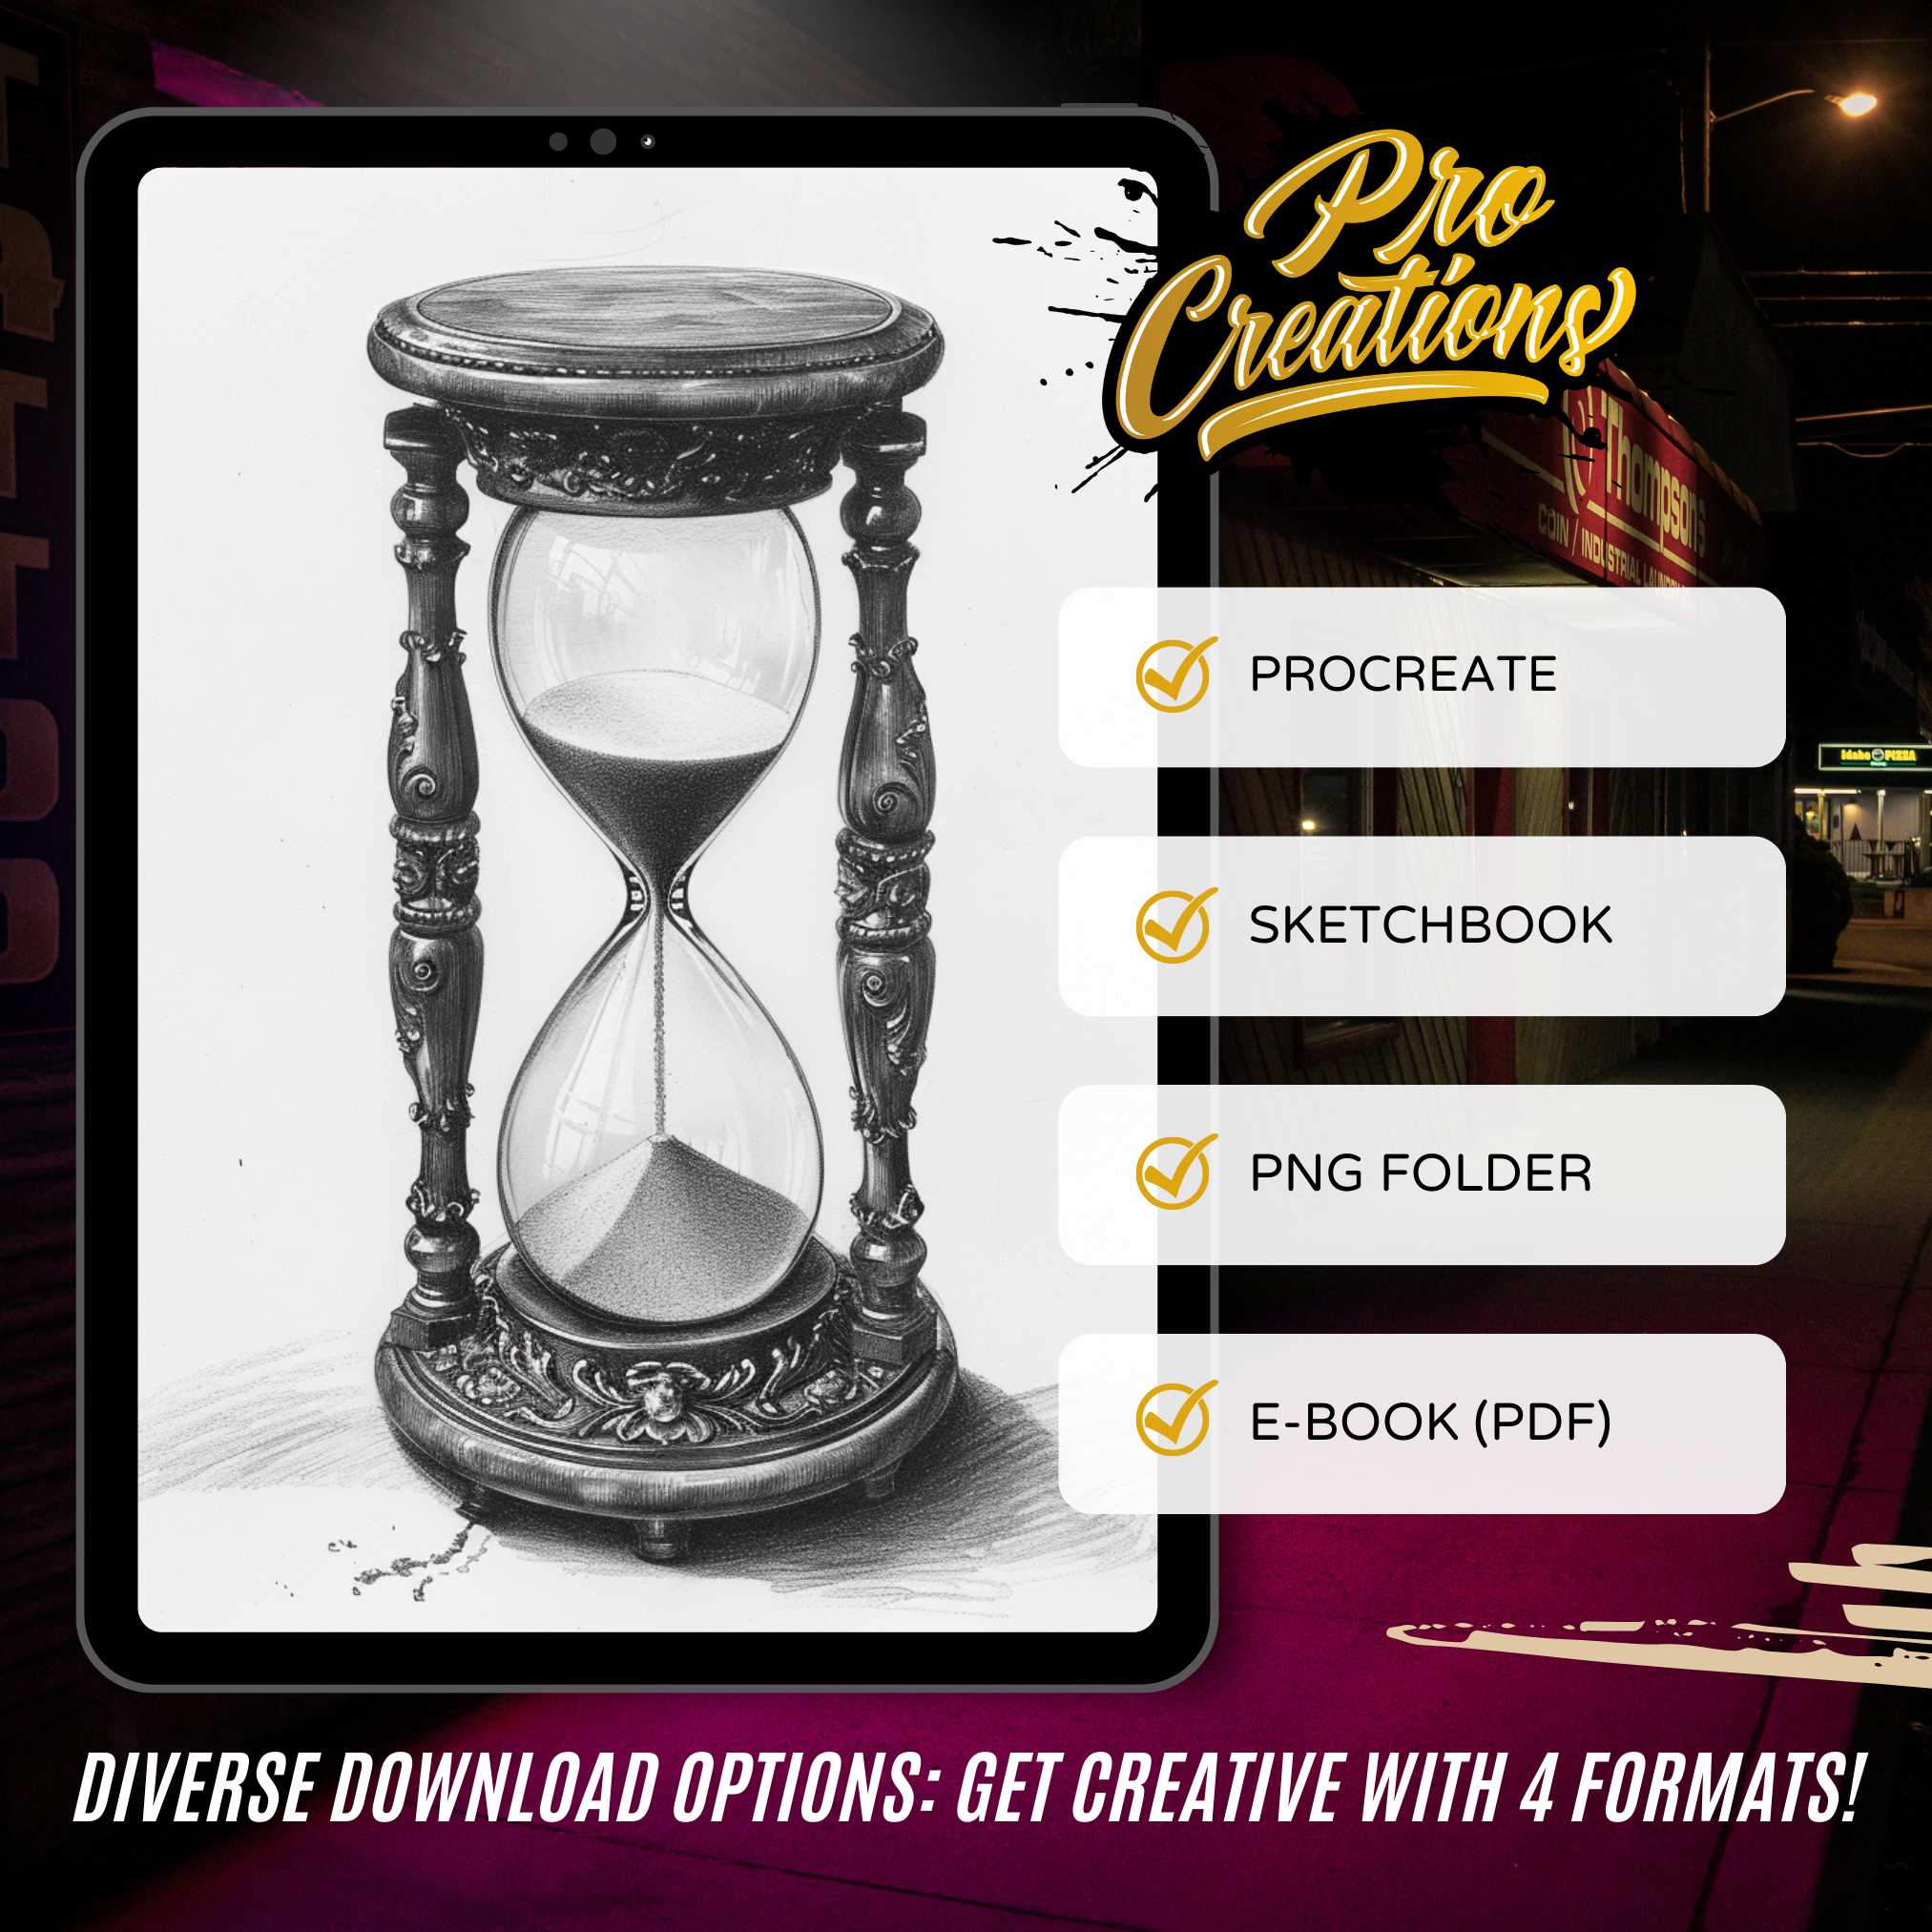 Hourglass Digital Tattoo Element Design Collection: 100 Procreate & Sketchbook Images